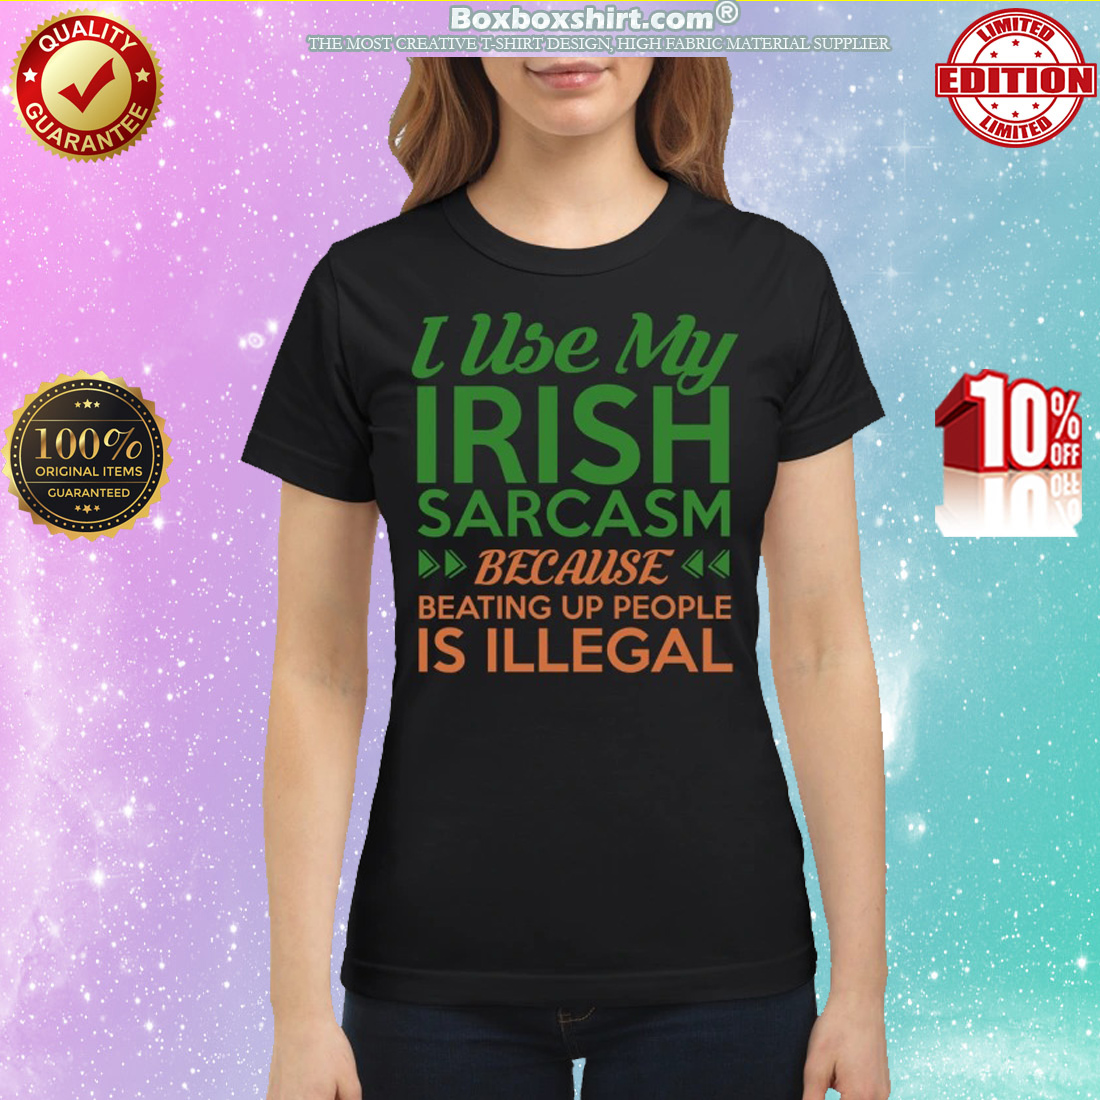 I used my Irish sarcasm because beating up people is illegal classic shirt